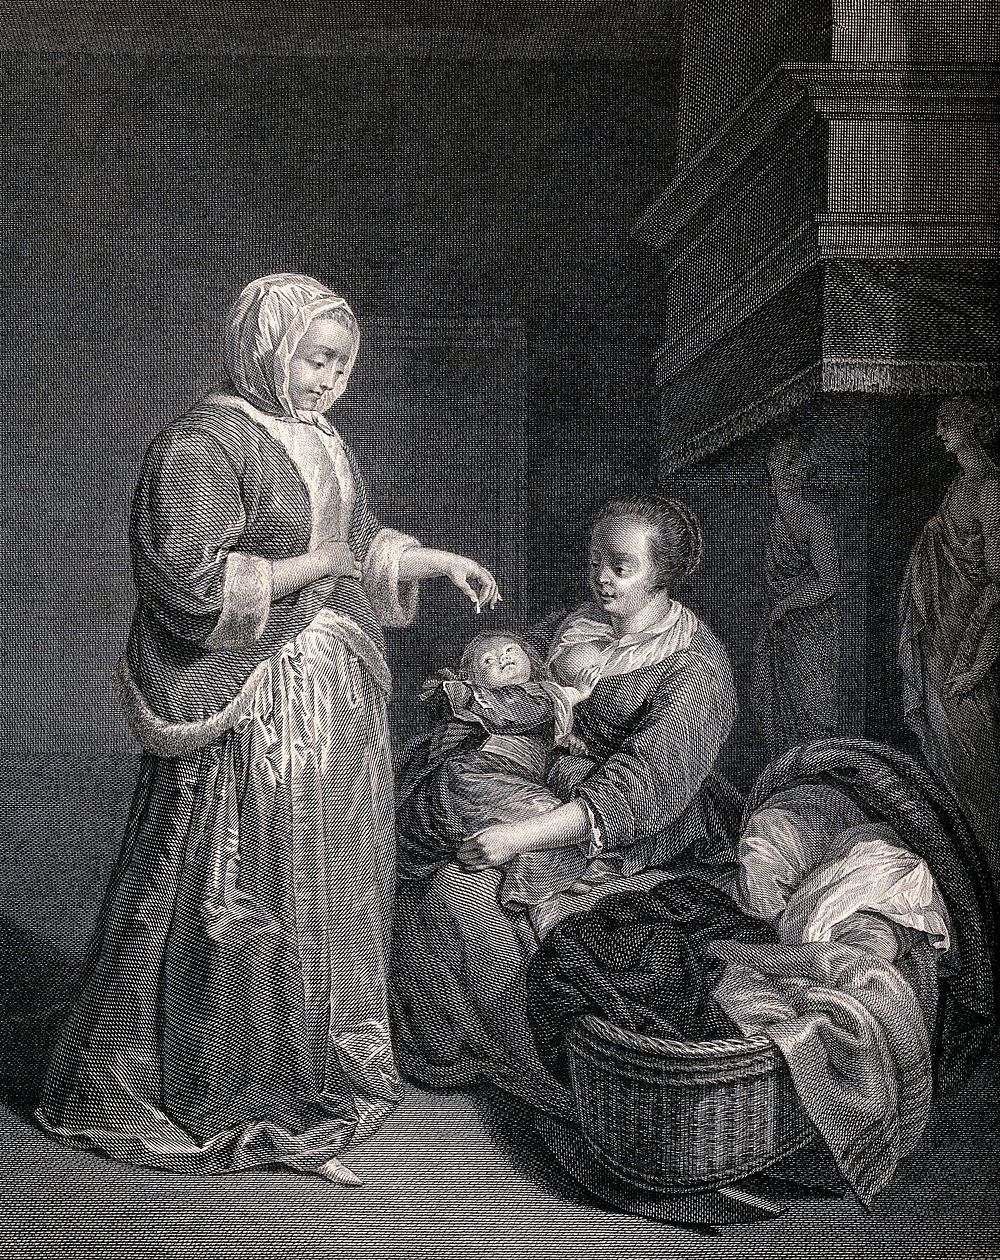 Two women tend to a child . Engraving.